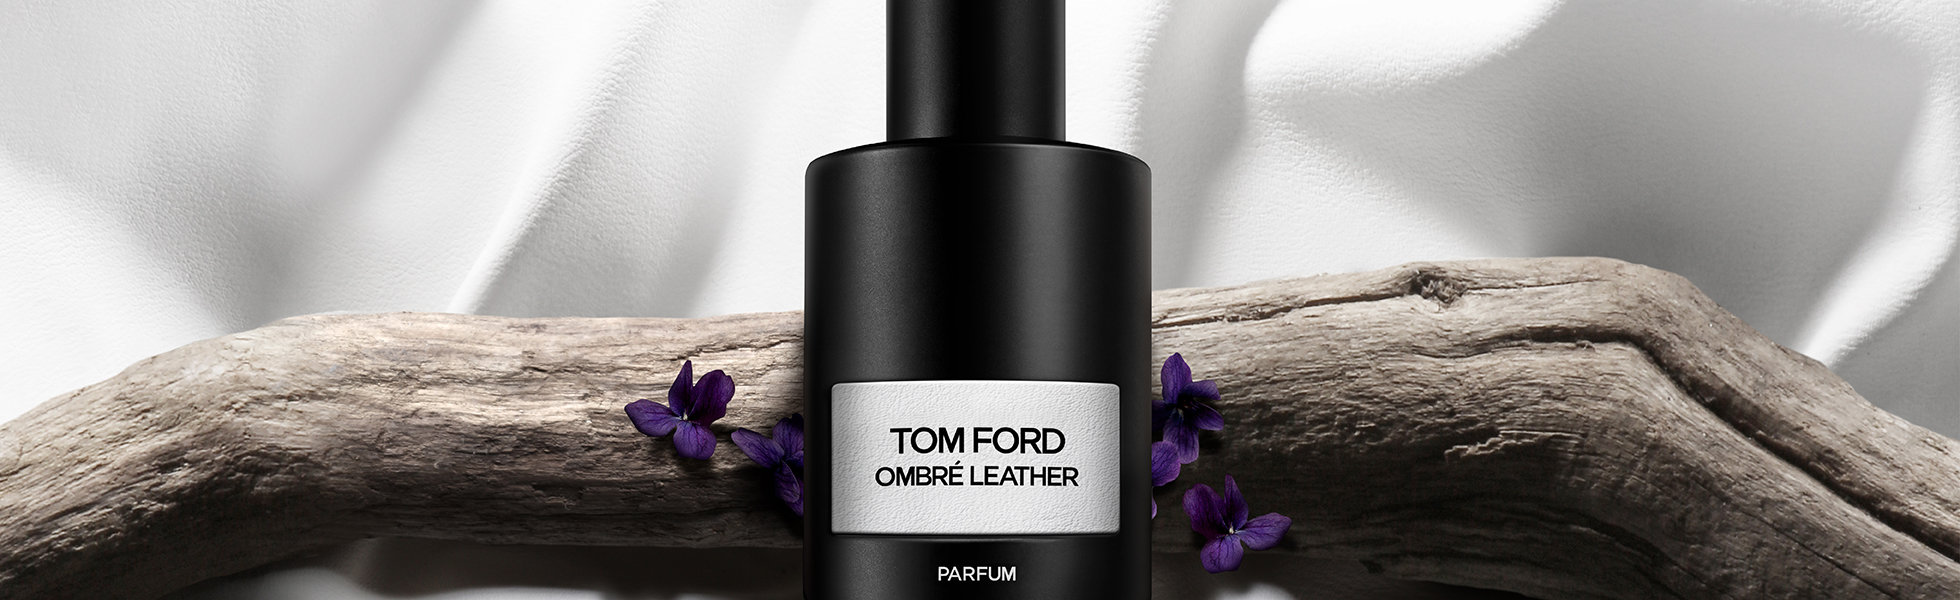 TOM FORD BEAUTY New Arrivals